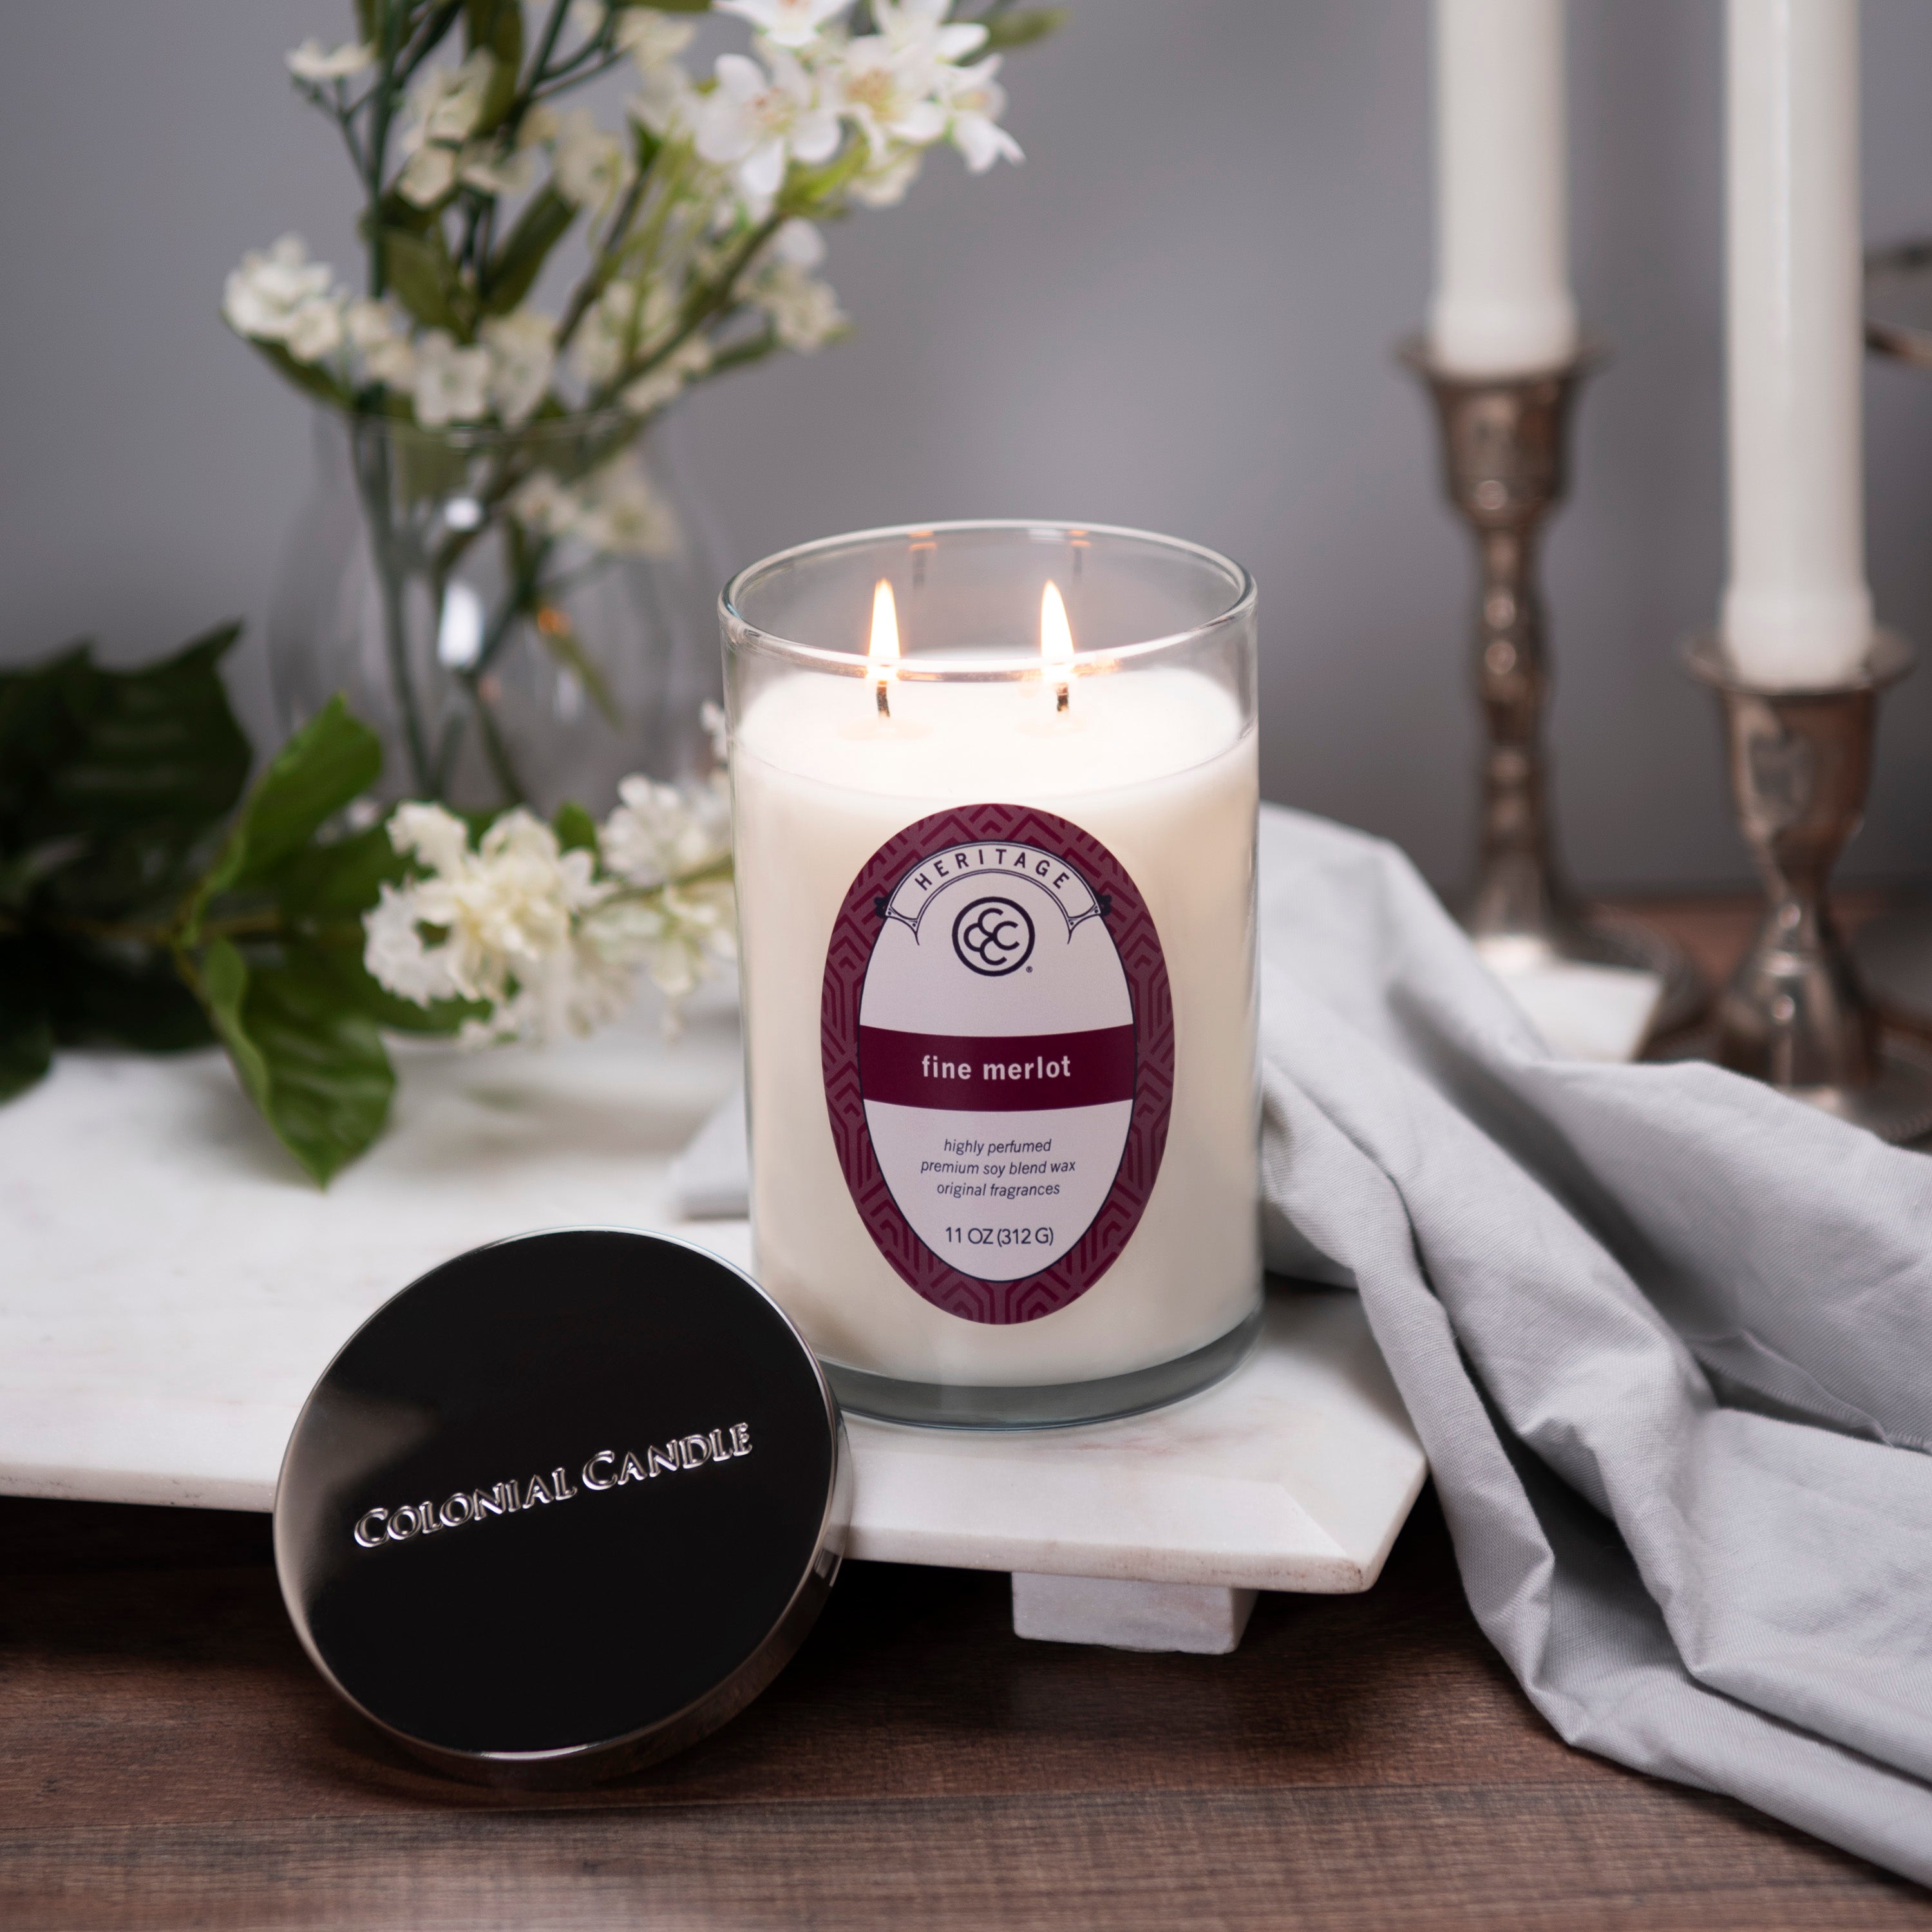 Fresh & Clean Scented Soy Candle 3.5oz Size - CLEARANCE - Discontinued Candle  Scent